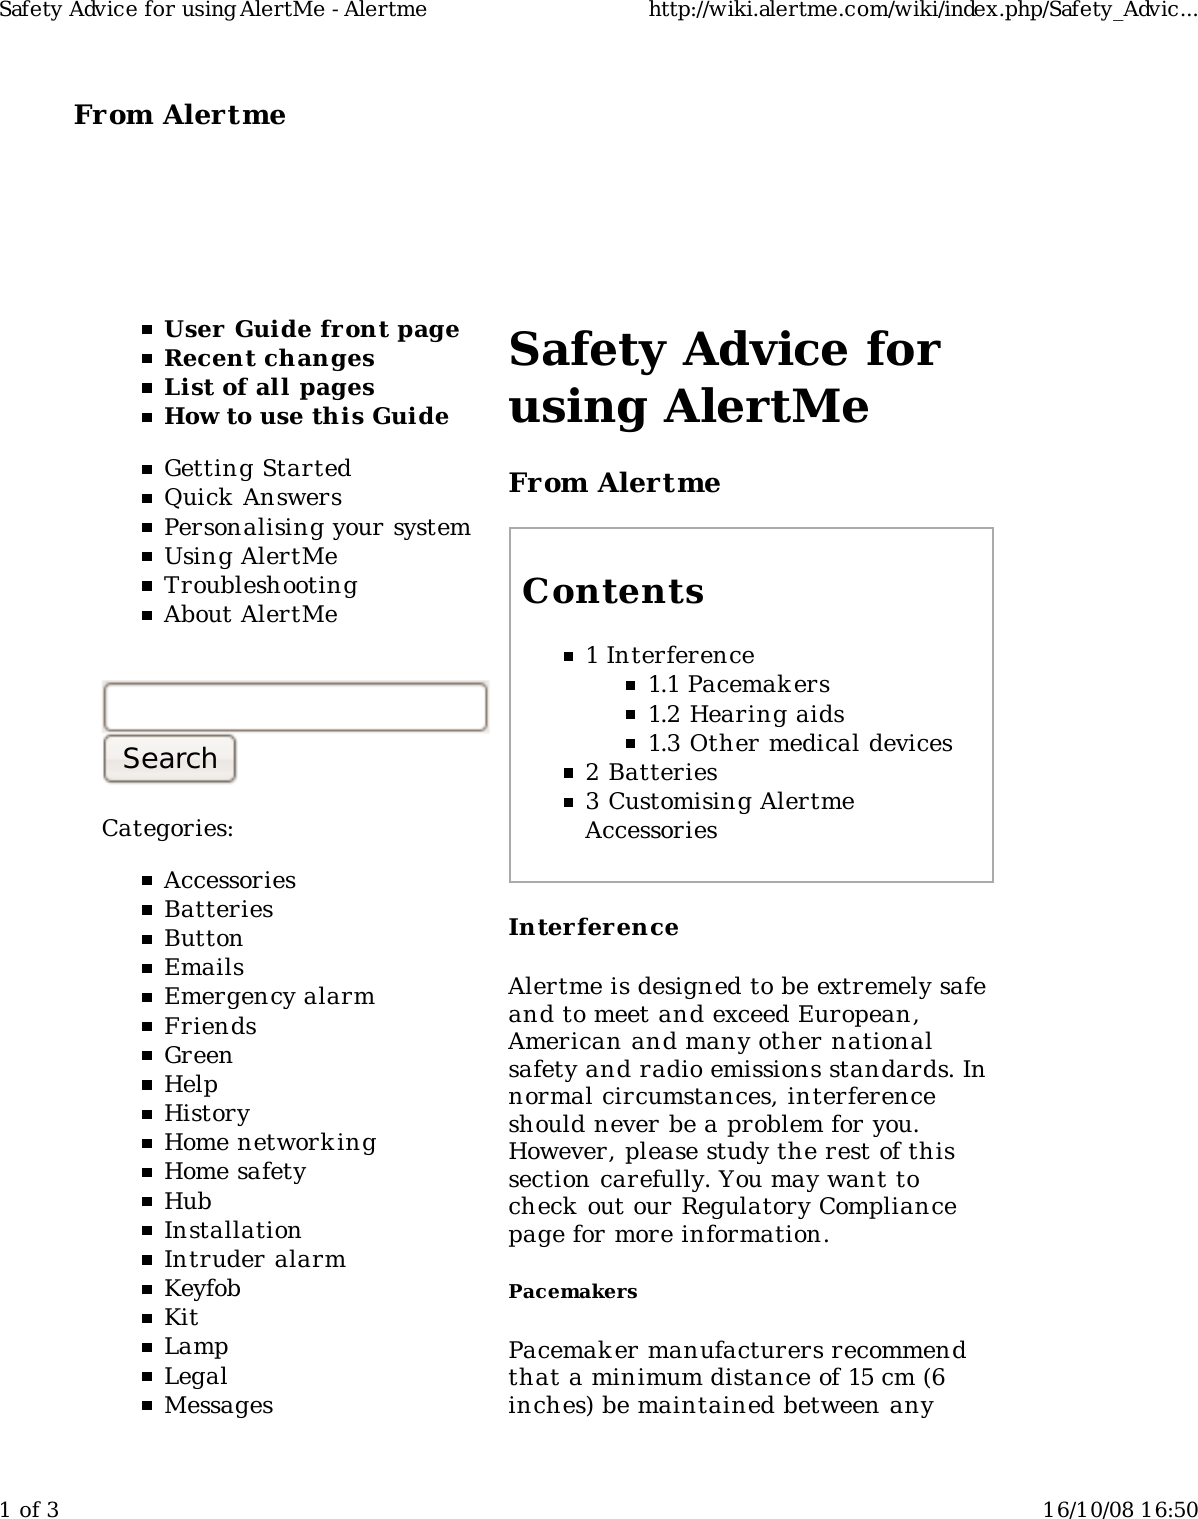 From Alertme  User Guide front pageRecent changesList of all pagesHow to use this GuideGetting StartedQuick AnswersPersonalising your systemUsing AlertMeTroubleshootingAbout AlertMeCategories:AccessoriesBatteriesButtonEmailsEmergency alarmFriendsGreenHelpHistoryHome network ingHome safetyHubInstallationIntruder alarmKeyfobKitLampLegalMessagesSafety Advice forusing AlertMeFrom AlertmeContents1 Interference1.1 Pacemakers1.2 Hearing aids1.3 Other medical devices2 Batteries3 Customising AlertmeAccessoriesInterferenceAlertme is designed to be extremely safeand to meet and exceed European,American and many other nationalsafety and radio emissions standards. Innormal circumstances, interferenceshould never be a problem for you.However, please study the rest of thissection carefully. You may want tocheck out our Regulatory Compliancepage for more information.PacemakersPacemak er manufacturers recommendthat a minimum distance of 15 cm (6inches) be maintained between anySafety Advice for using AlertMe - Alertme http://wiki.alertme.com/wiki/index.php/Safety_Advic...1 of 3 16/10/08 16:50